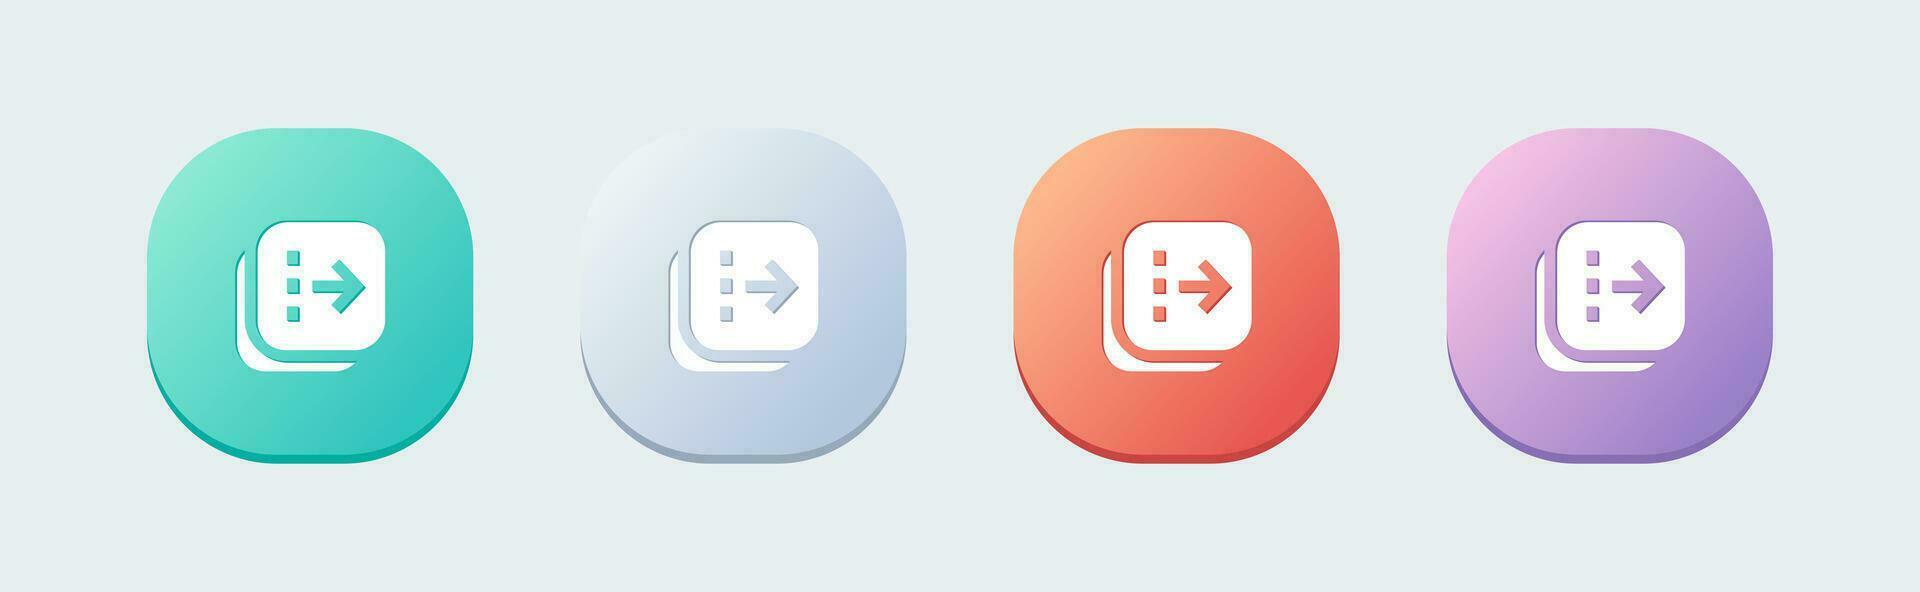 Flip solid icon in flat design style. Arrow switch signs vector illustration.